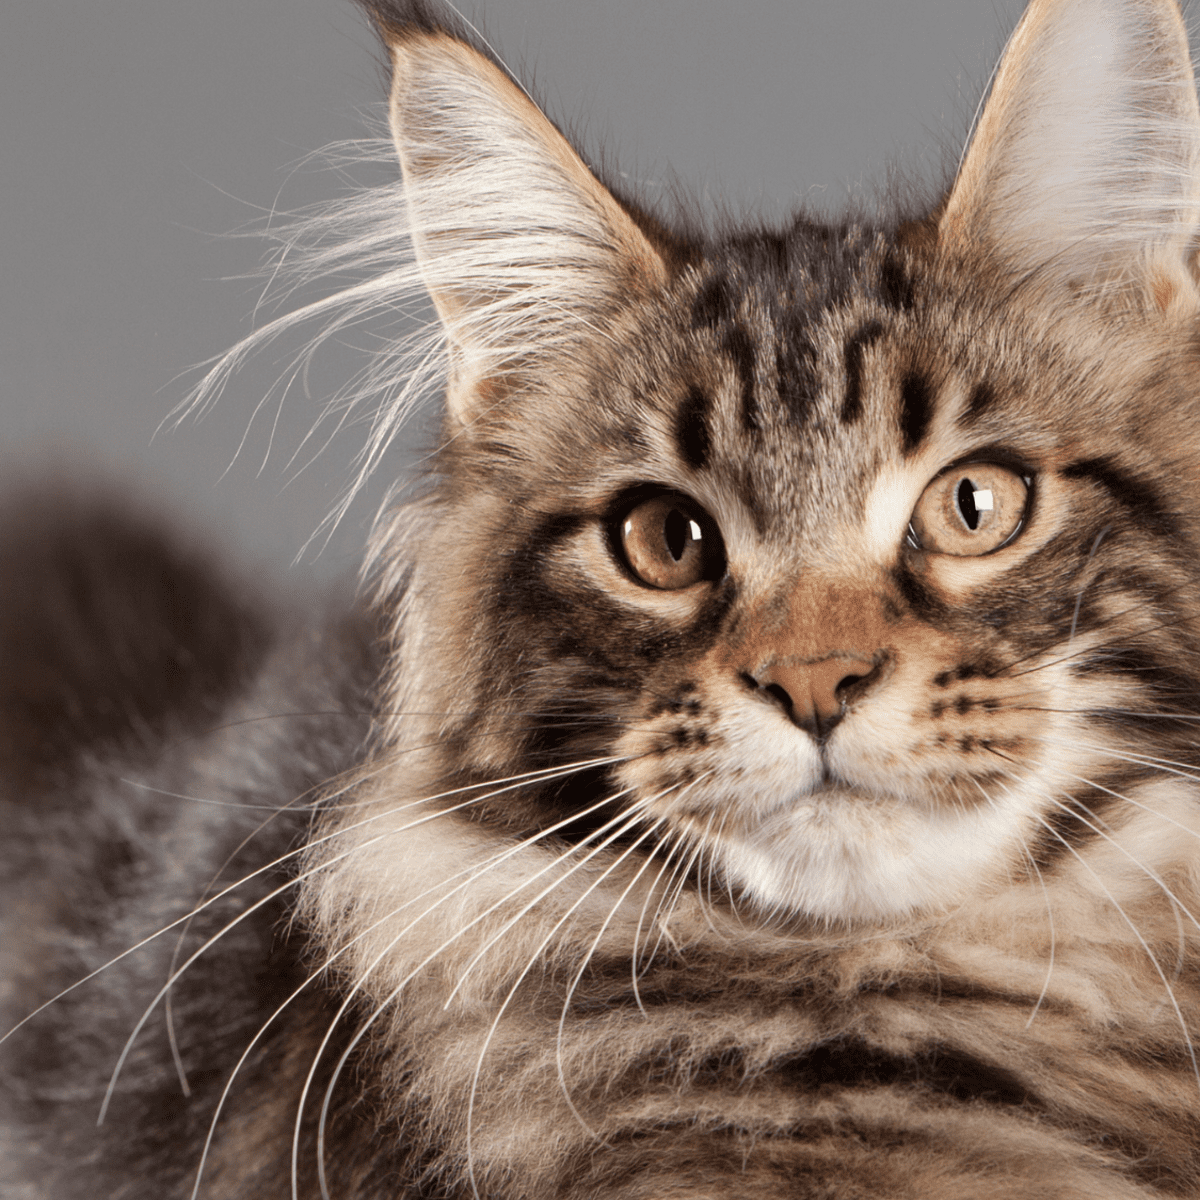 https://images.saymedia-content.com/.image/ar_1:1%2Cc_fill%2Ccs_srgb%2Cq_auto:eco%2Cw_1200/MTk5NjY3MTQwMzg1NTgwNjcy/all-about-the-maine-coon-cat-the-gentle-giant.png